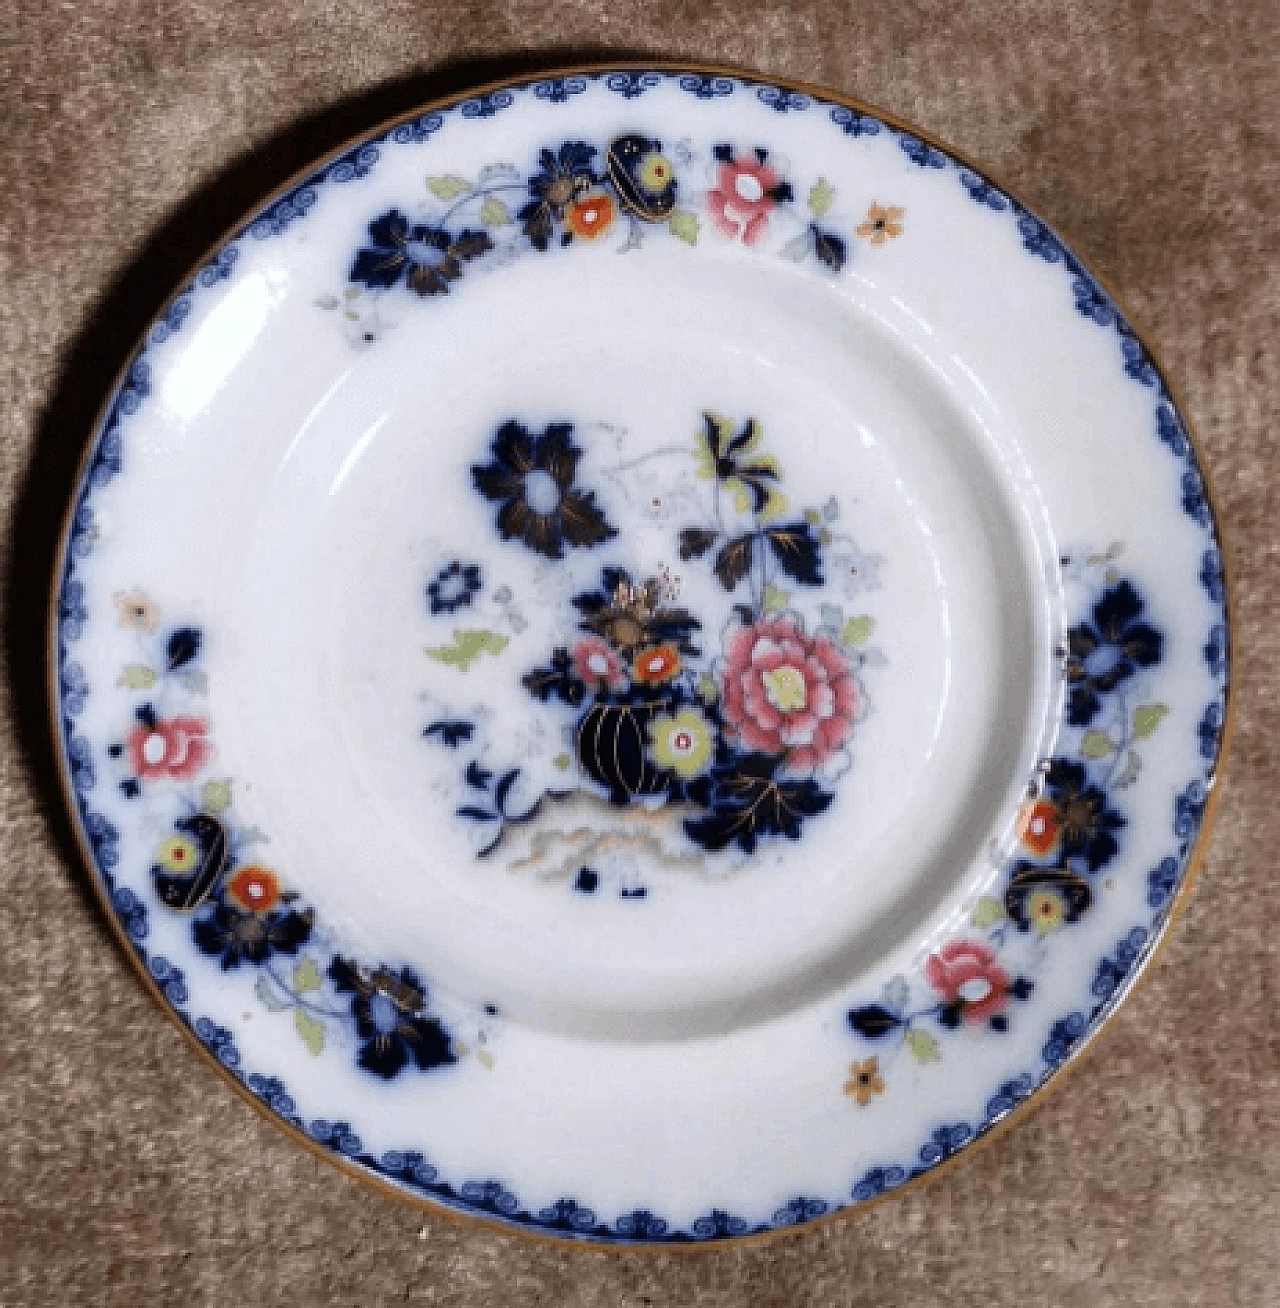 4 Victorian ceramic plates with Royal Arms mark, mid-19th century 11